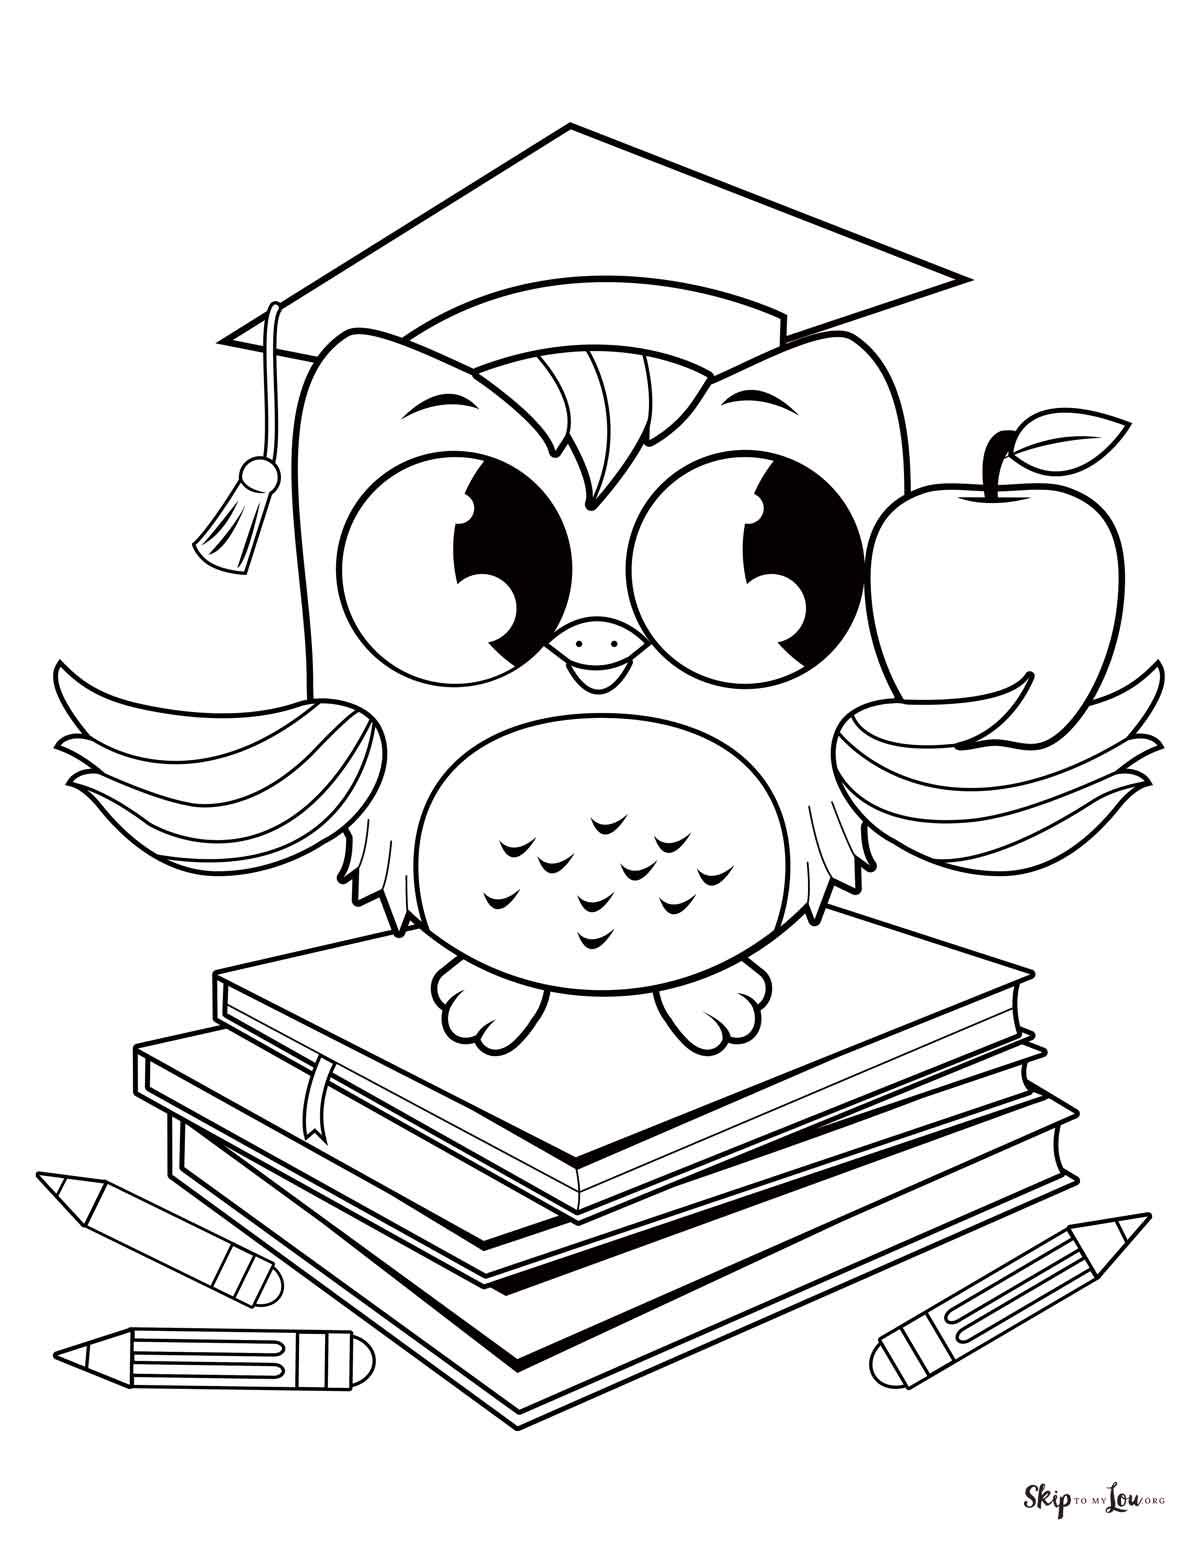 Owl with books #12